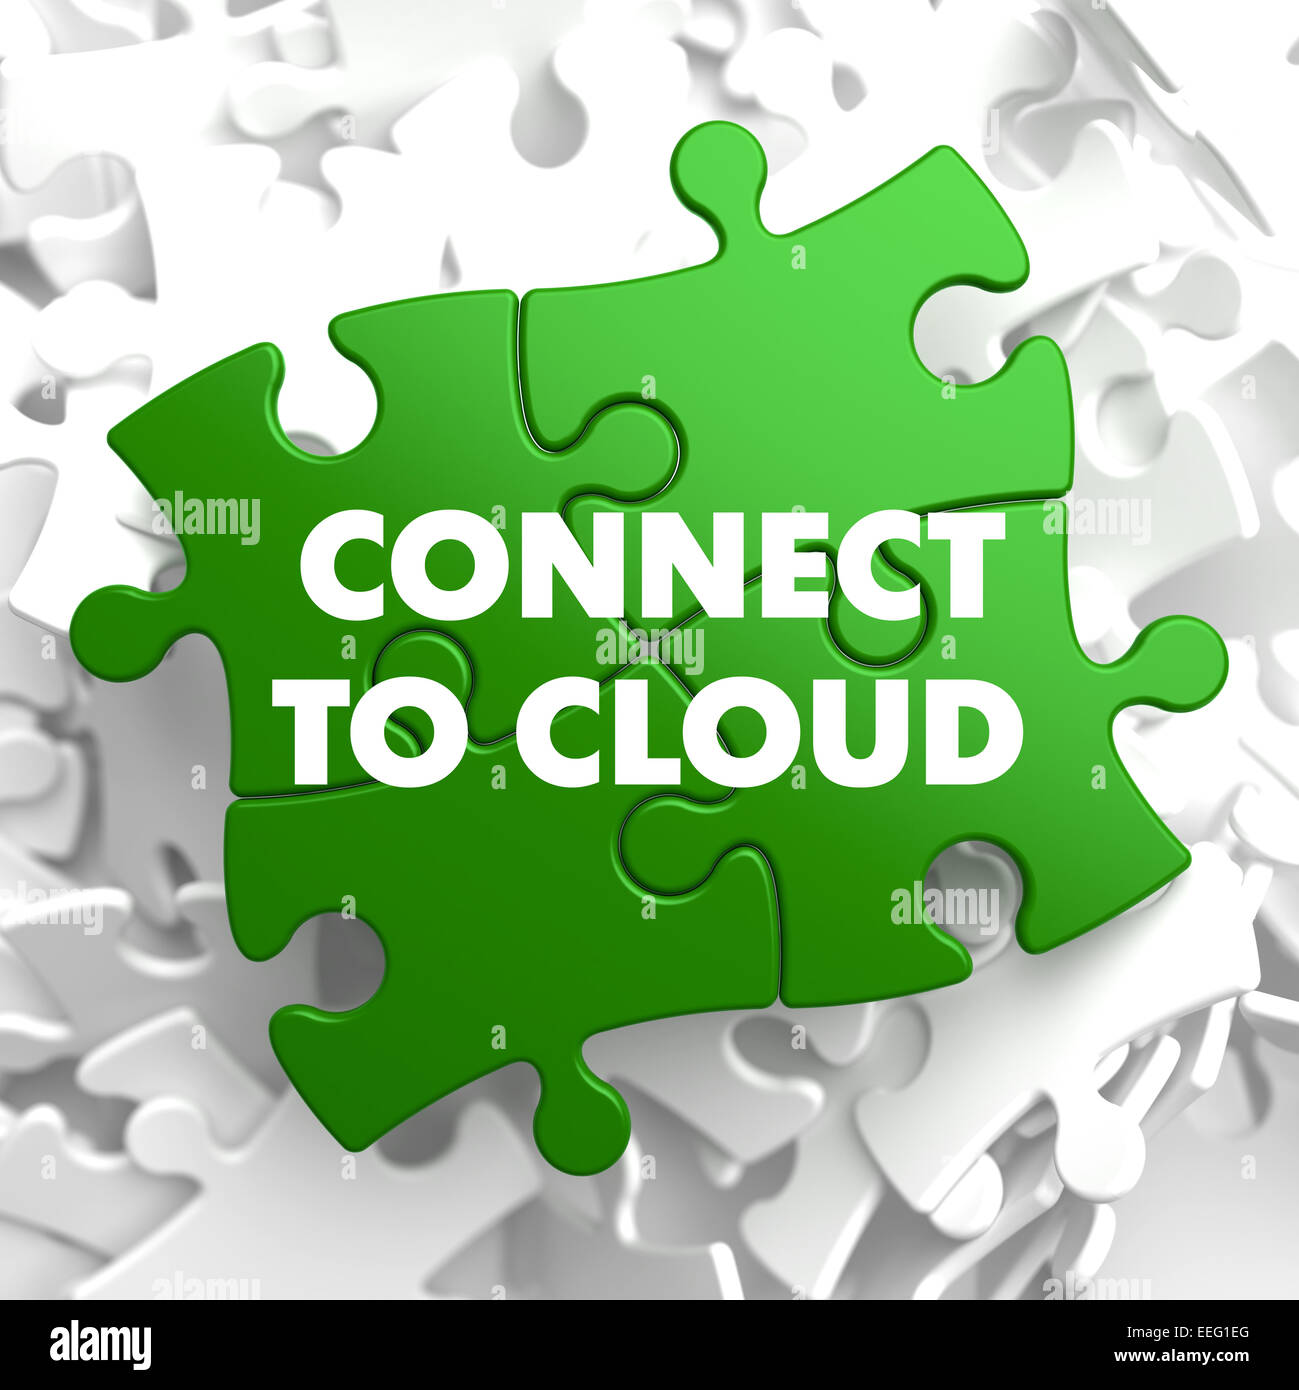 Connect to Cloud on Green Puzzle. Stock Photo